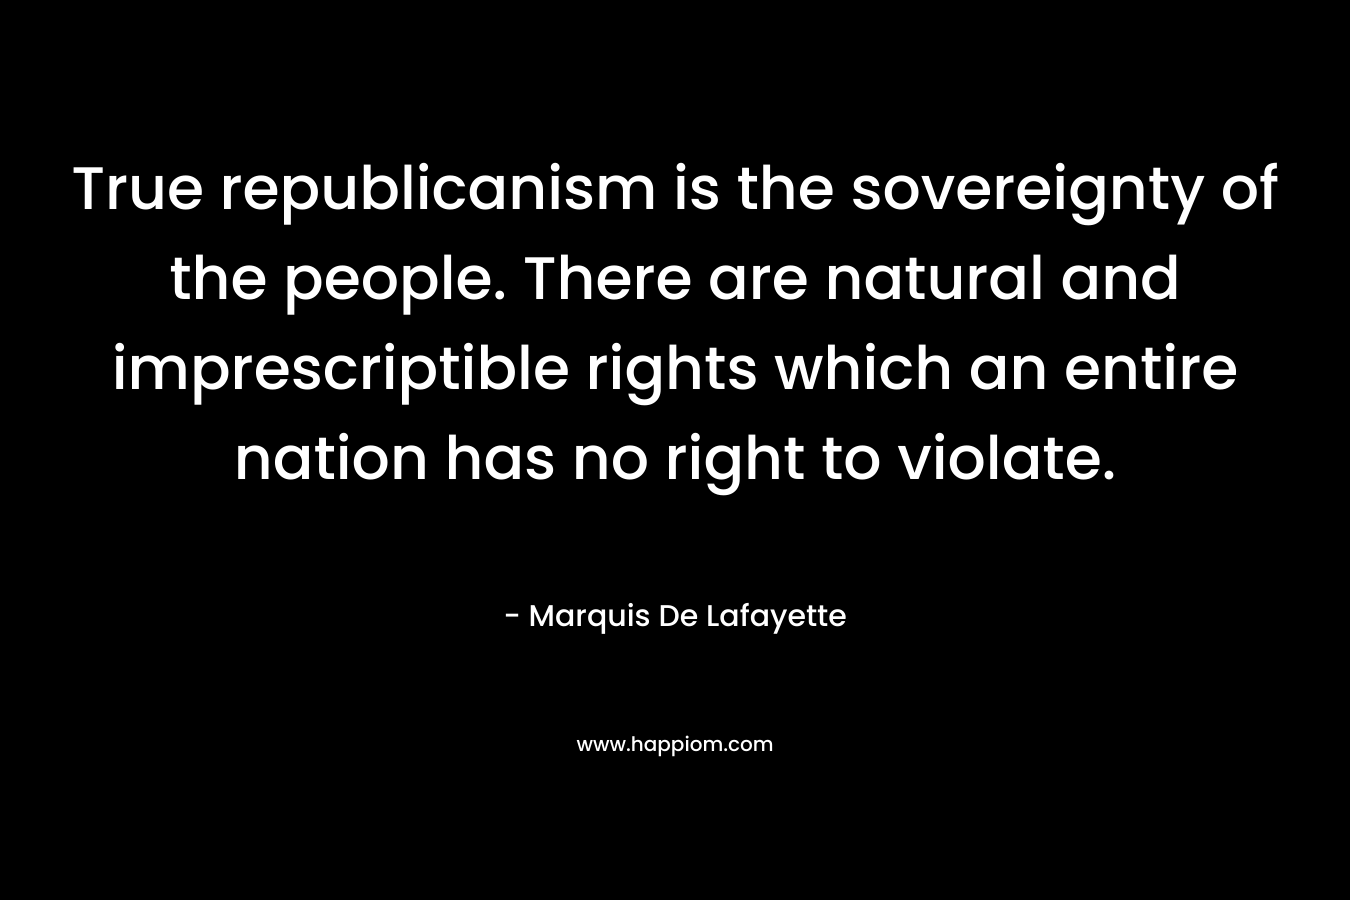 True republicanism is the sovereignty of the people. There are natural and imprescriptible rights which an entire nation has no right to violate. – Marquis De Lafayette